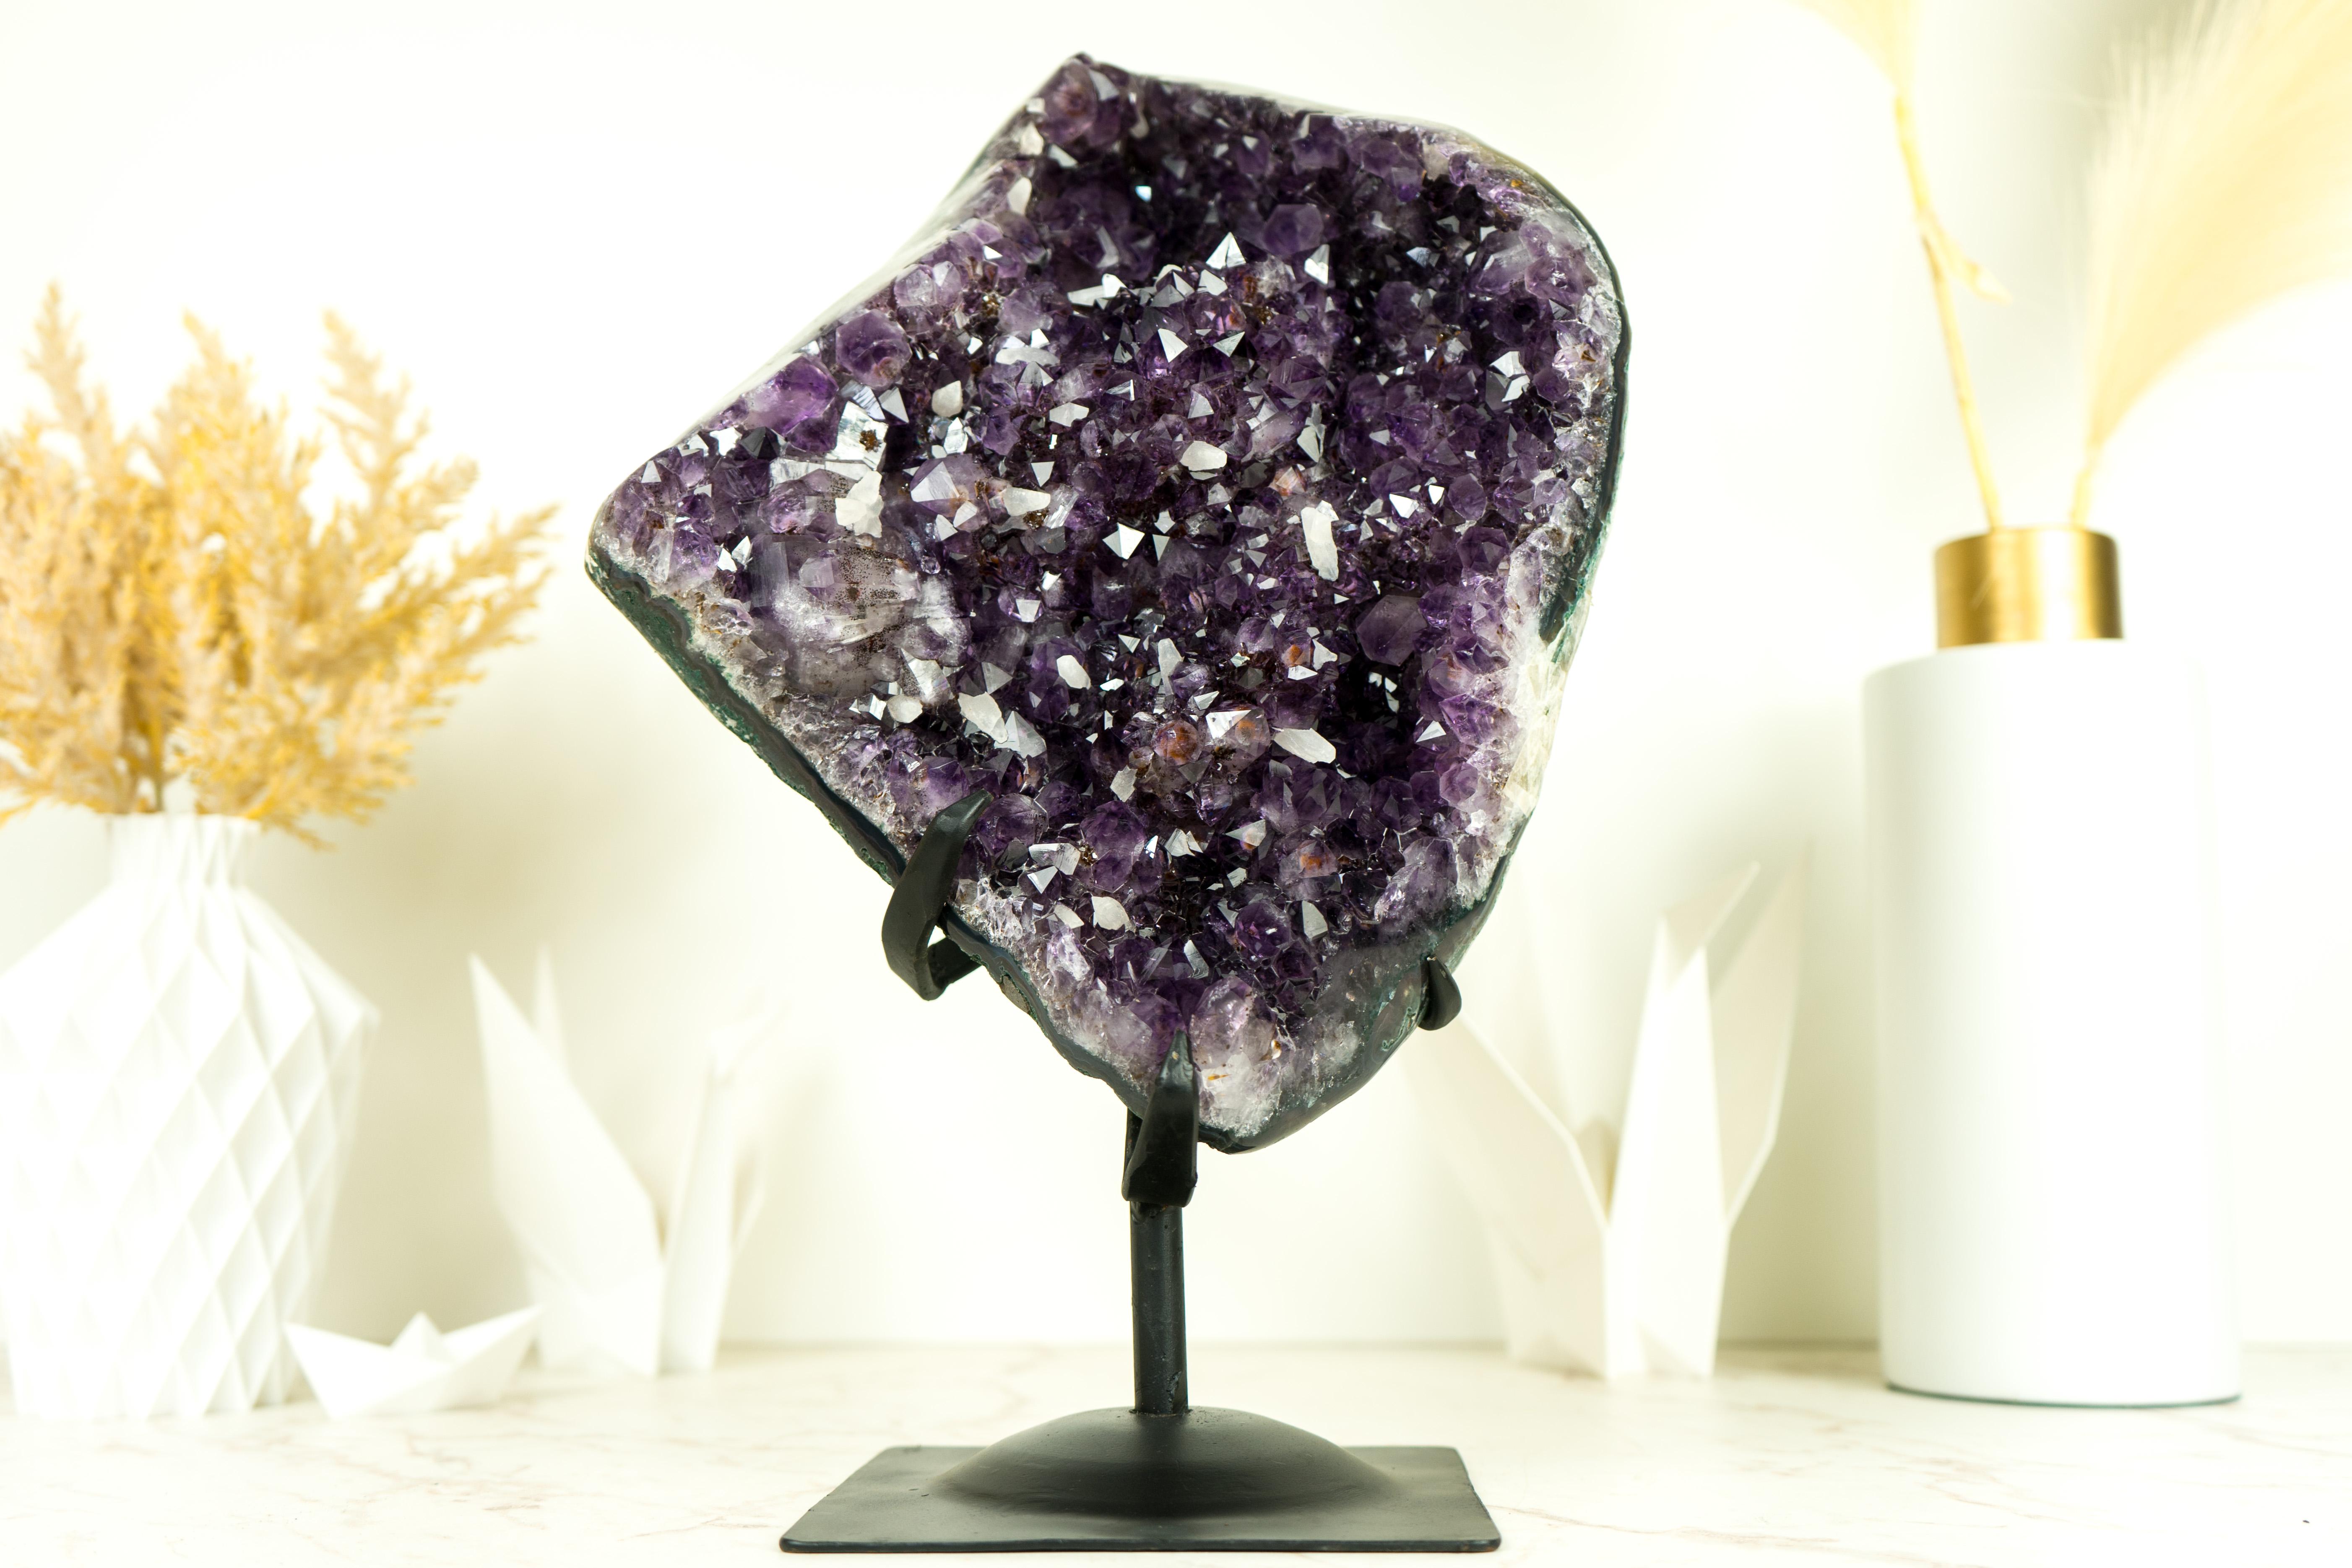 A super rare find, this Rare Gallery Quality Amethyst Cluster features large AAA dark purple amethyst druzy and numerous rare Cristobalite and Calcite inclusions spread throughout and create an aesthetically gorgeous amethyst specimen. A true gem